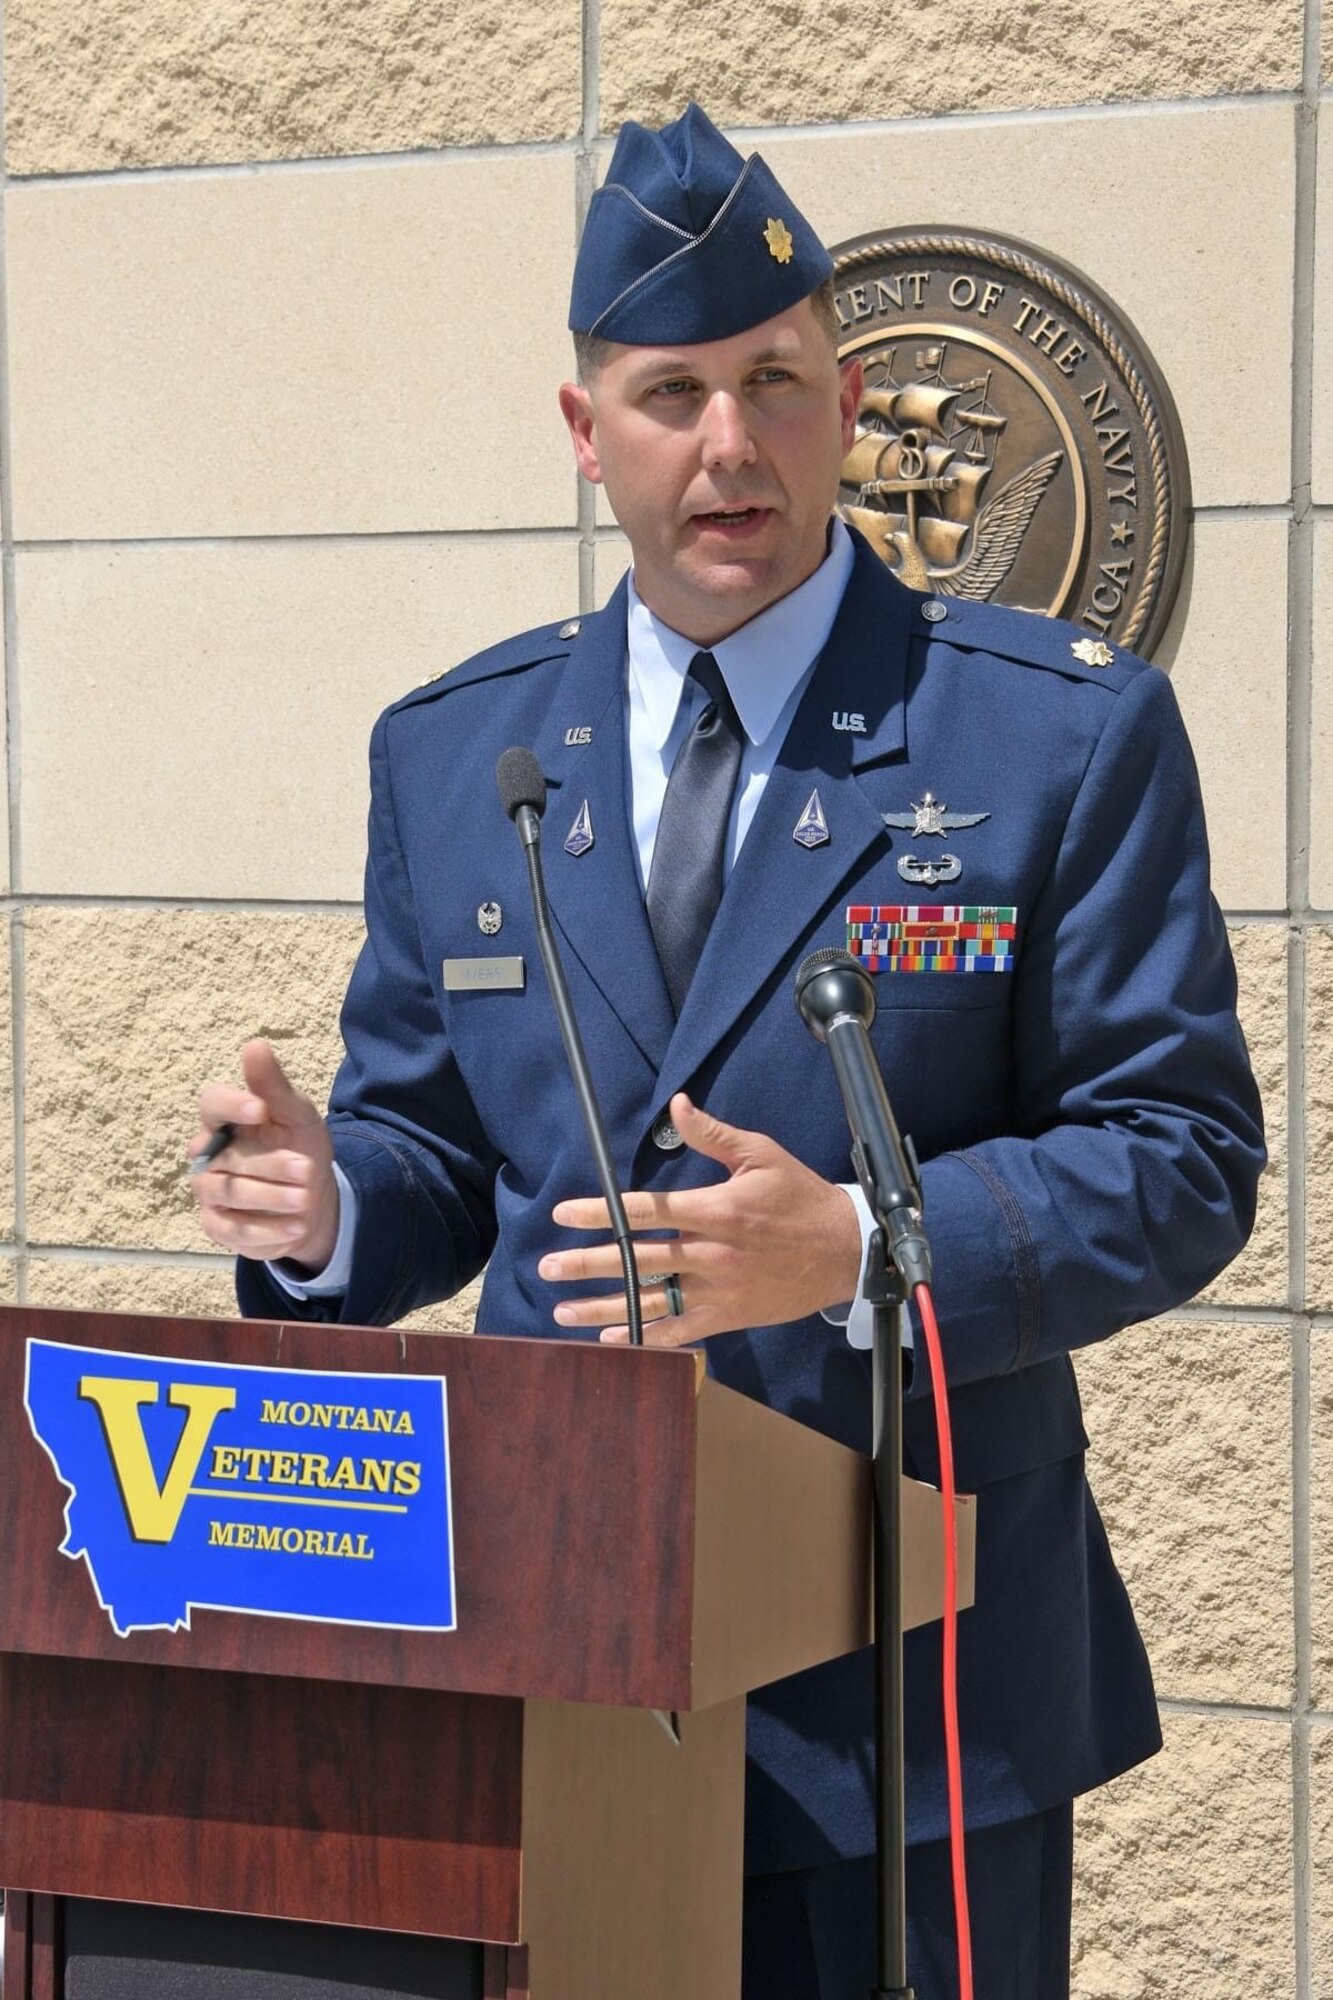 UUSF Major Jared Myers speaks at a ceremony recognizing the addition of the USSF seal at the Montana Veterans Memorial, June 2023. Myers transferred to the USSF in May 2022 and is serving at the Det 1, 22 SOPS commander at Malmostrom AFB, Montana.